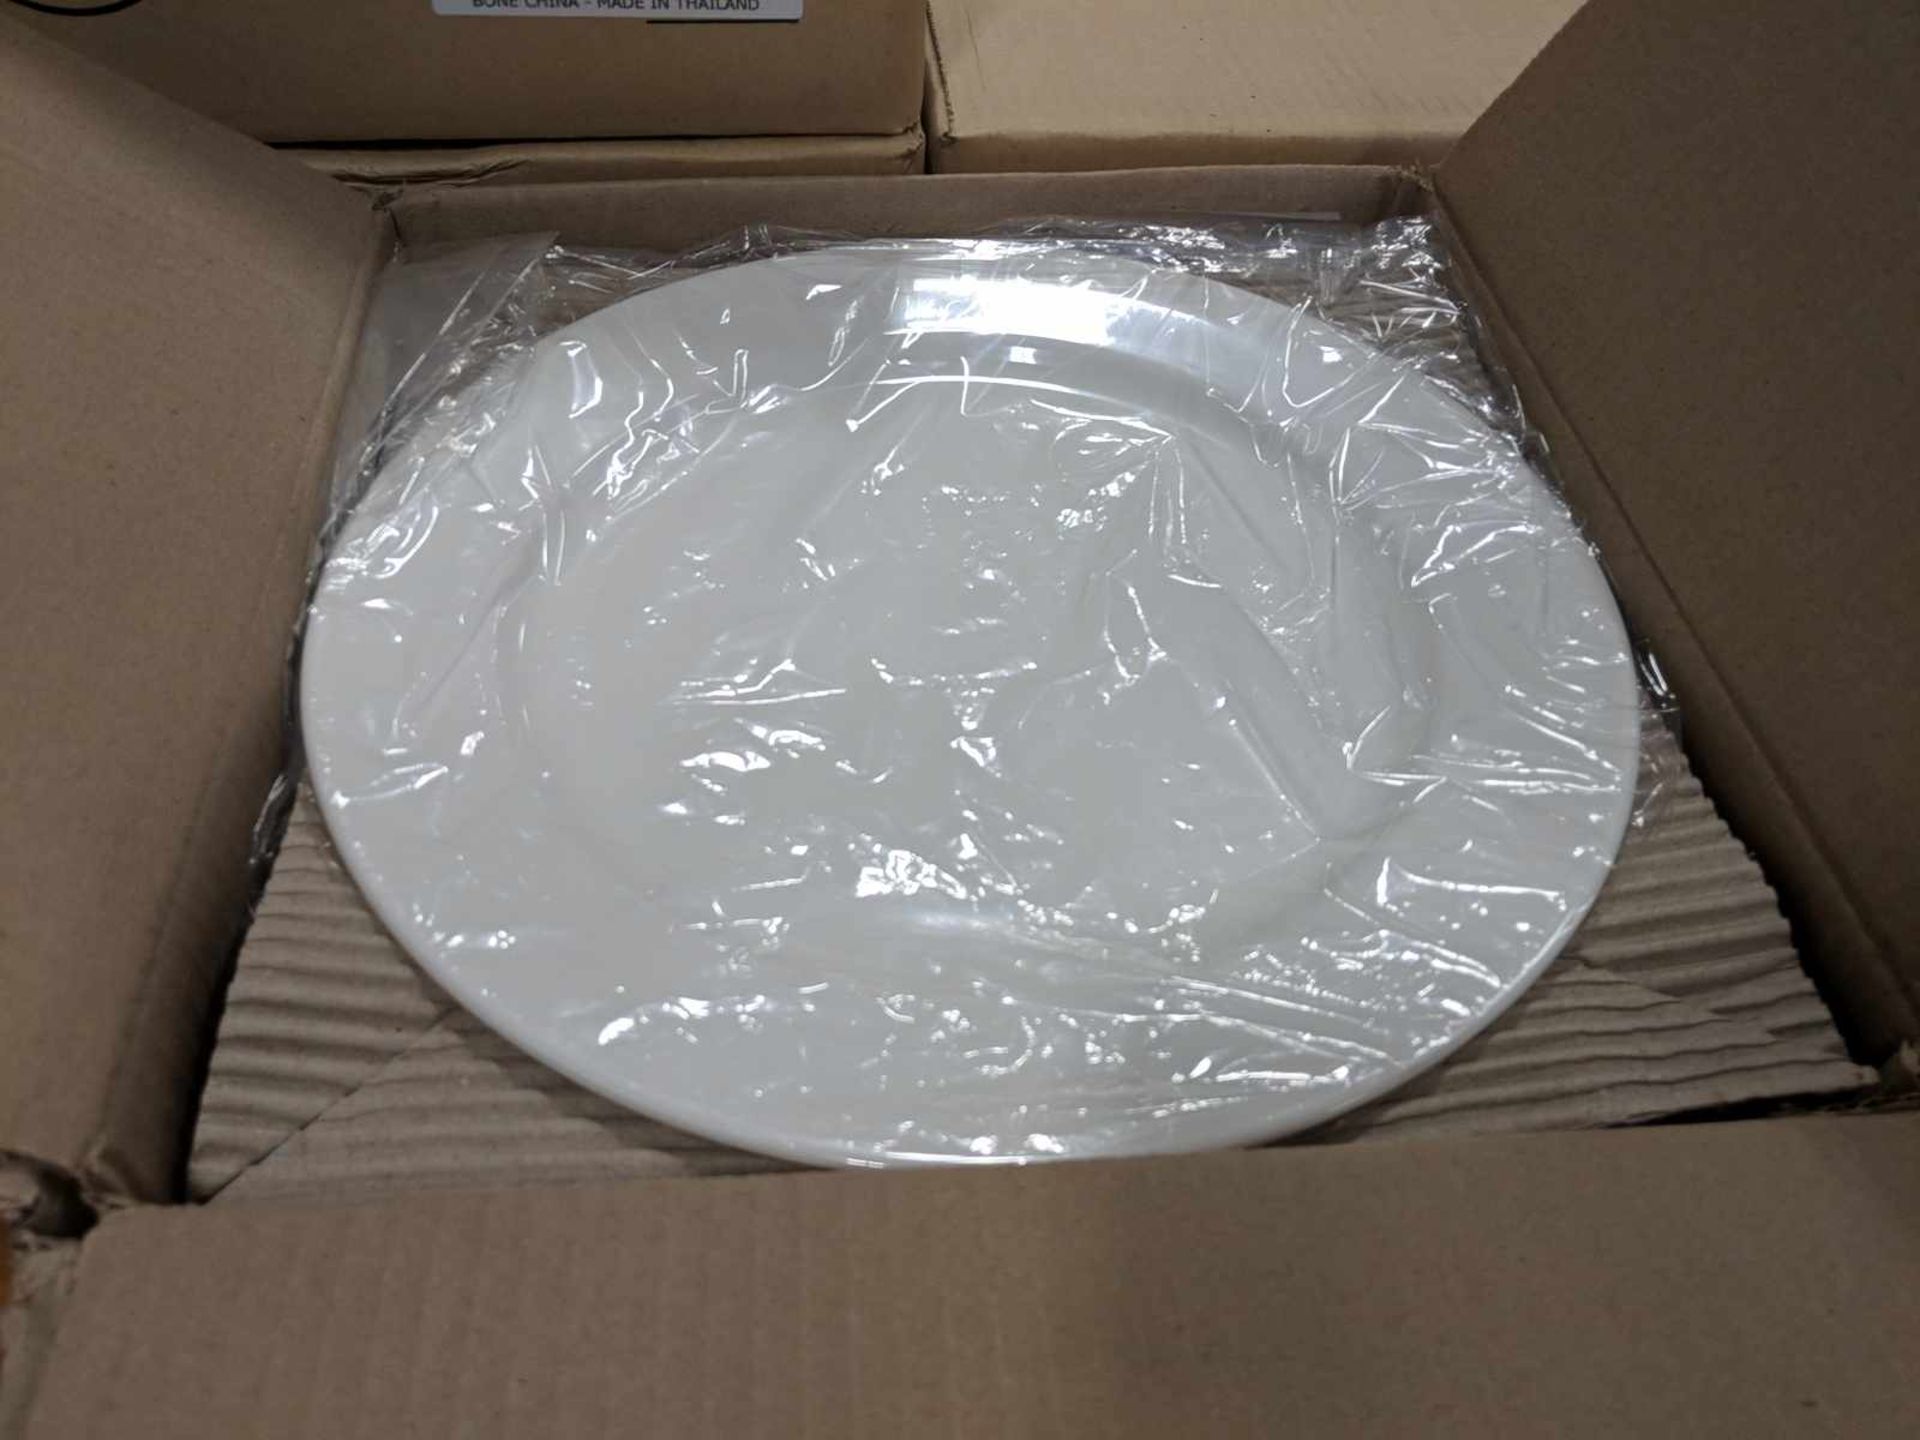 11" Infinity Dinner Plates - Lot of 48 (4 Cases), Arcoroc R1003